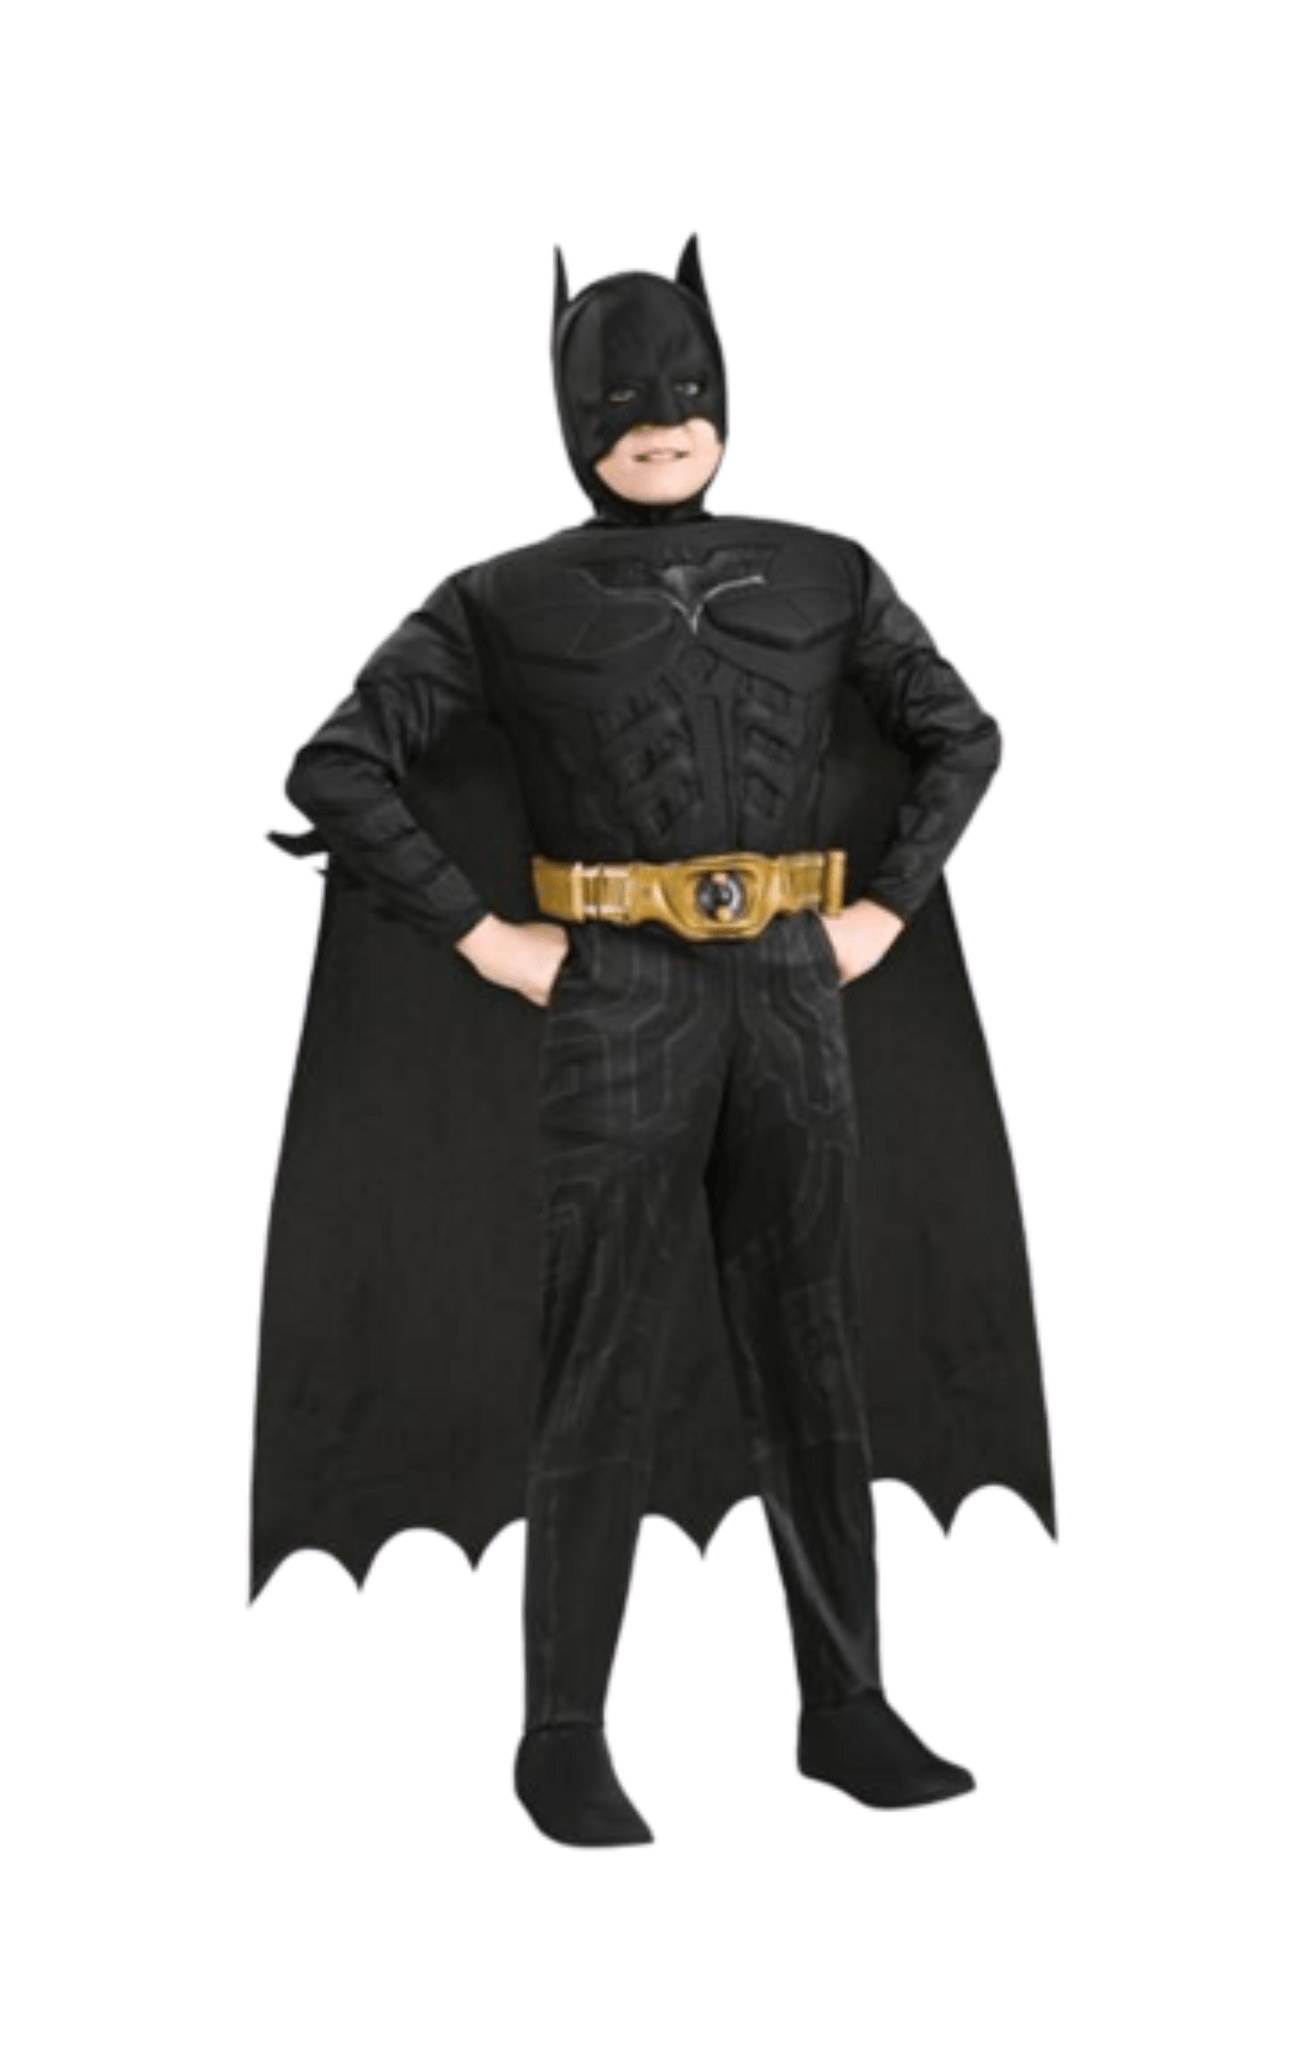 Batman Dark Knight Rises Child's Deluxe Muscle Chest Batman Costume With Mask/Headpiece and Cape